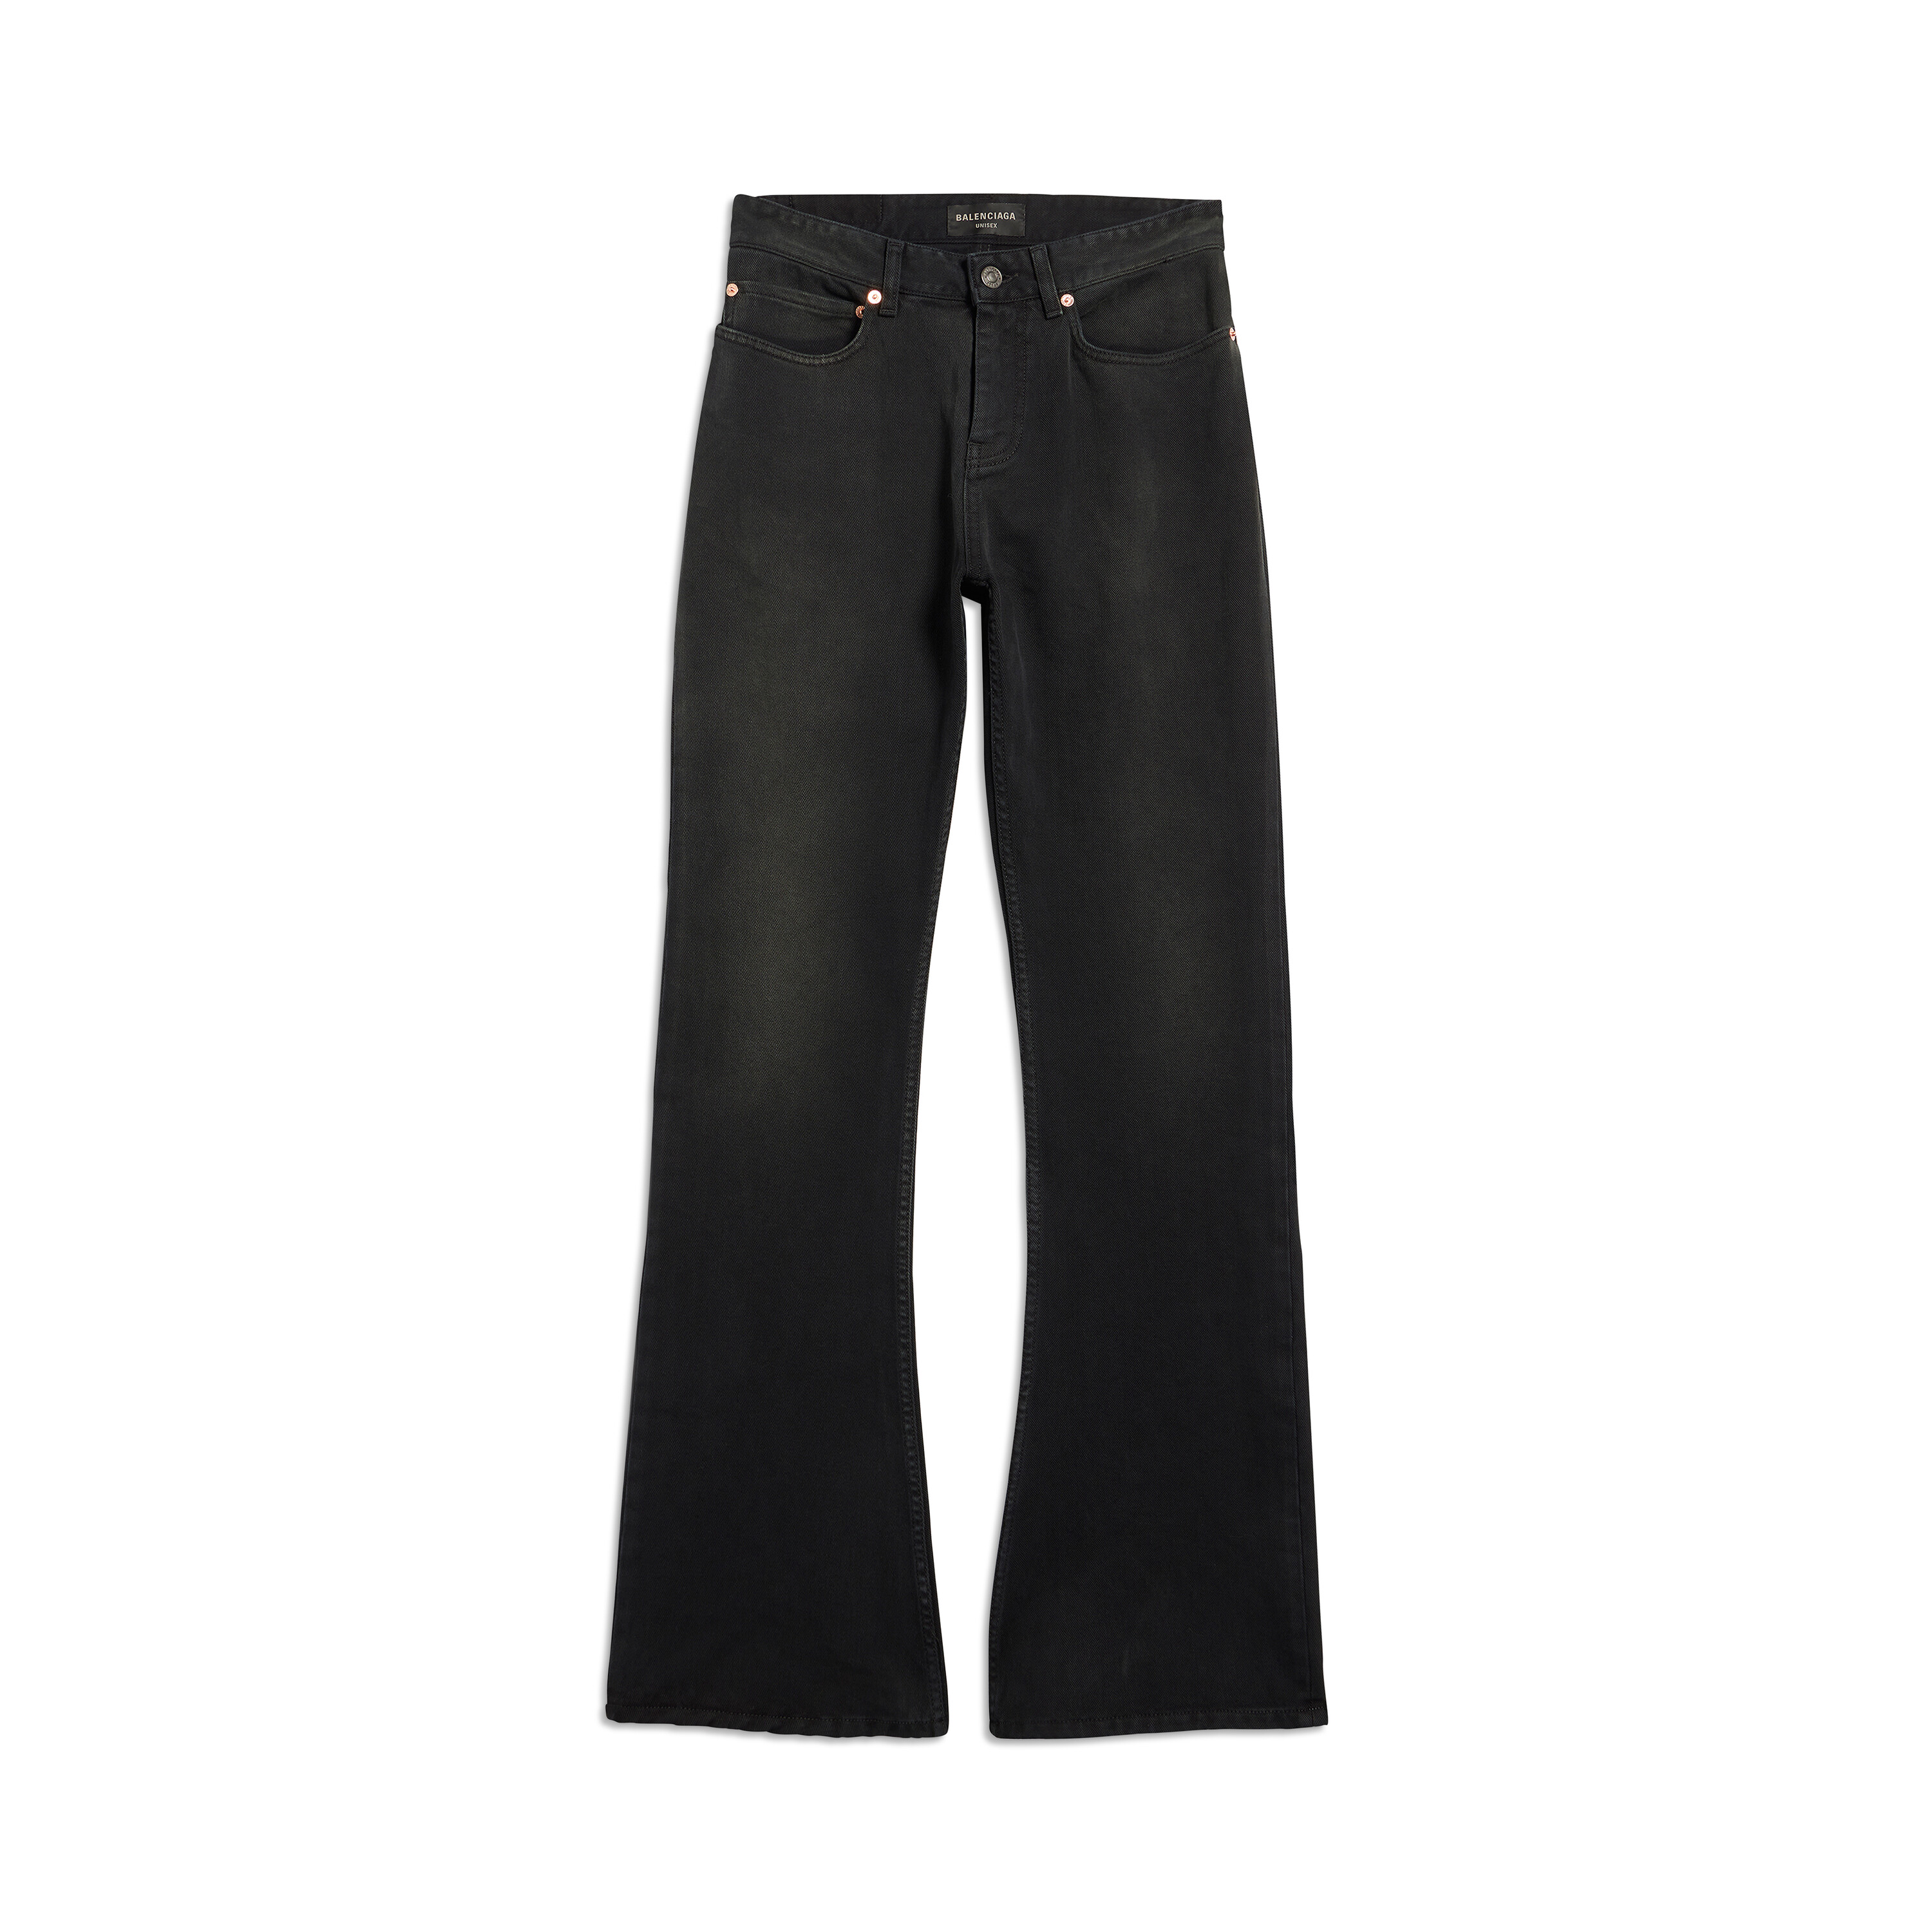 Trousers, Black Smart Bootcut Trousers